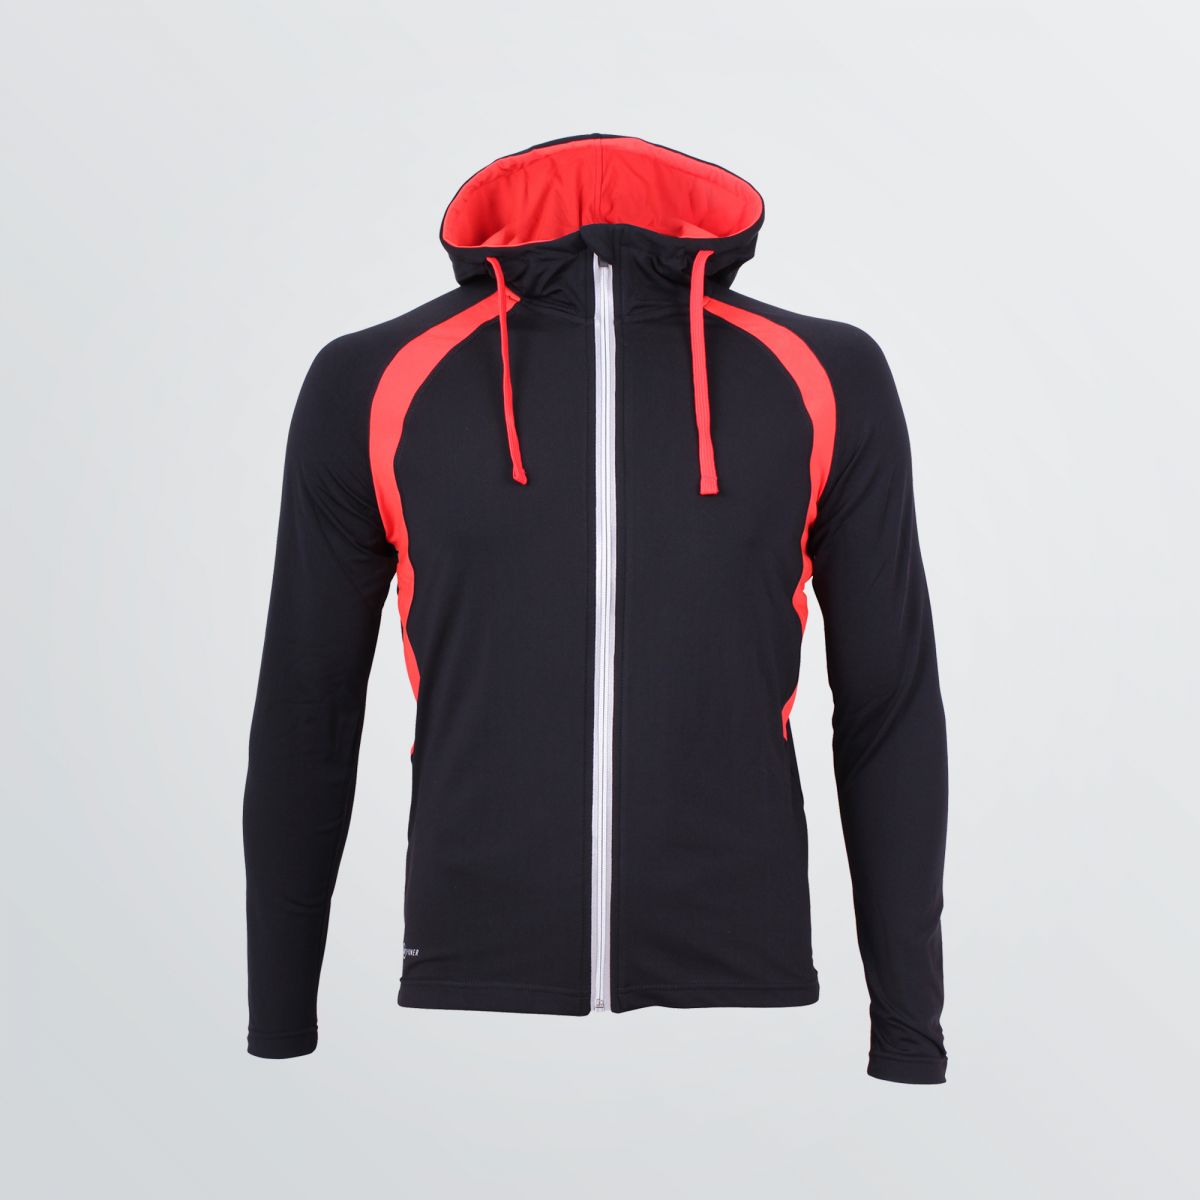 light weight Thermo Jacket for customisation depicted as a product example in black colour with red cords and shoulder panels - front view